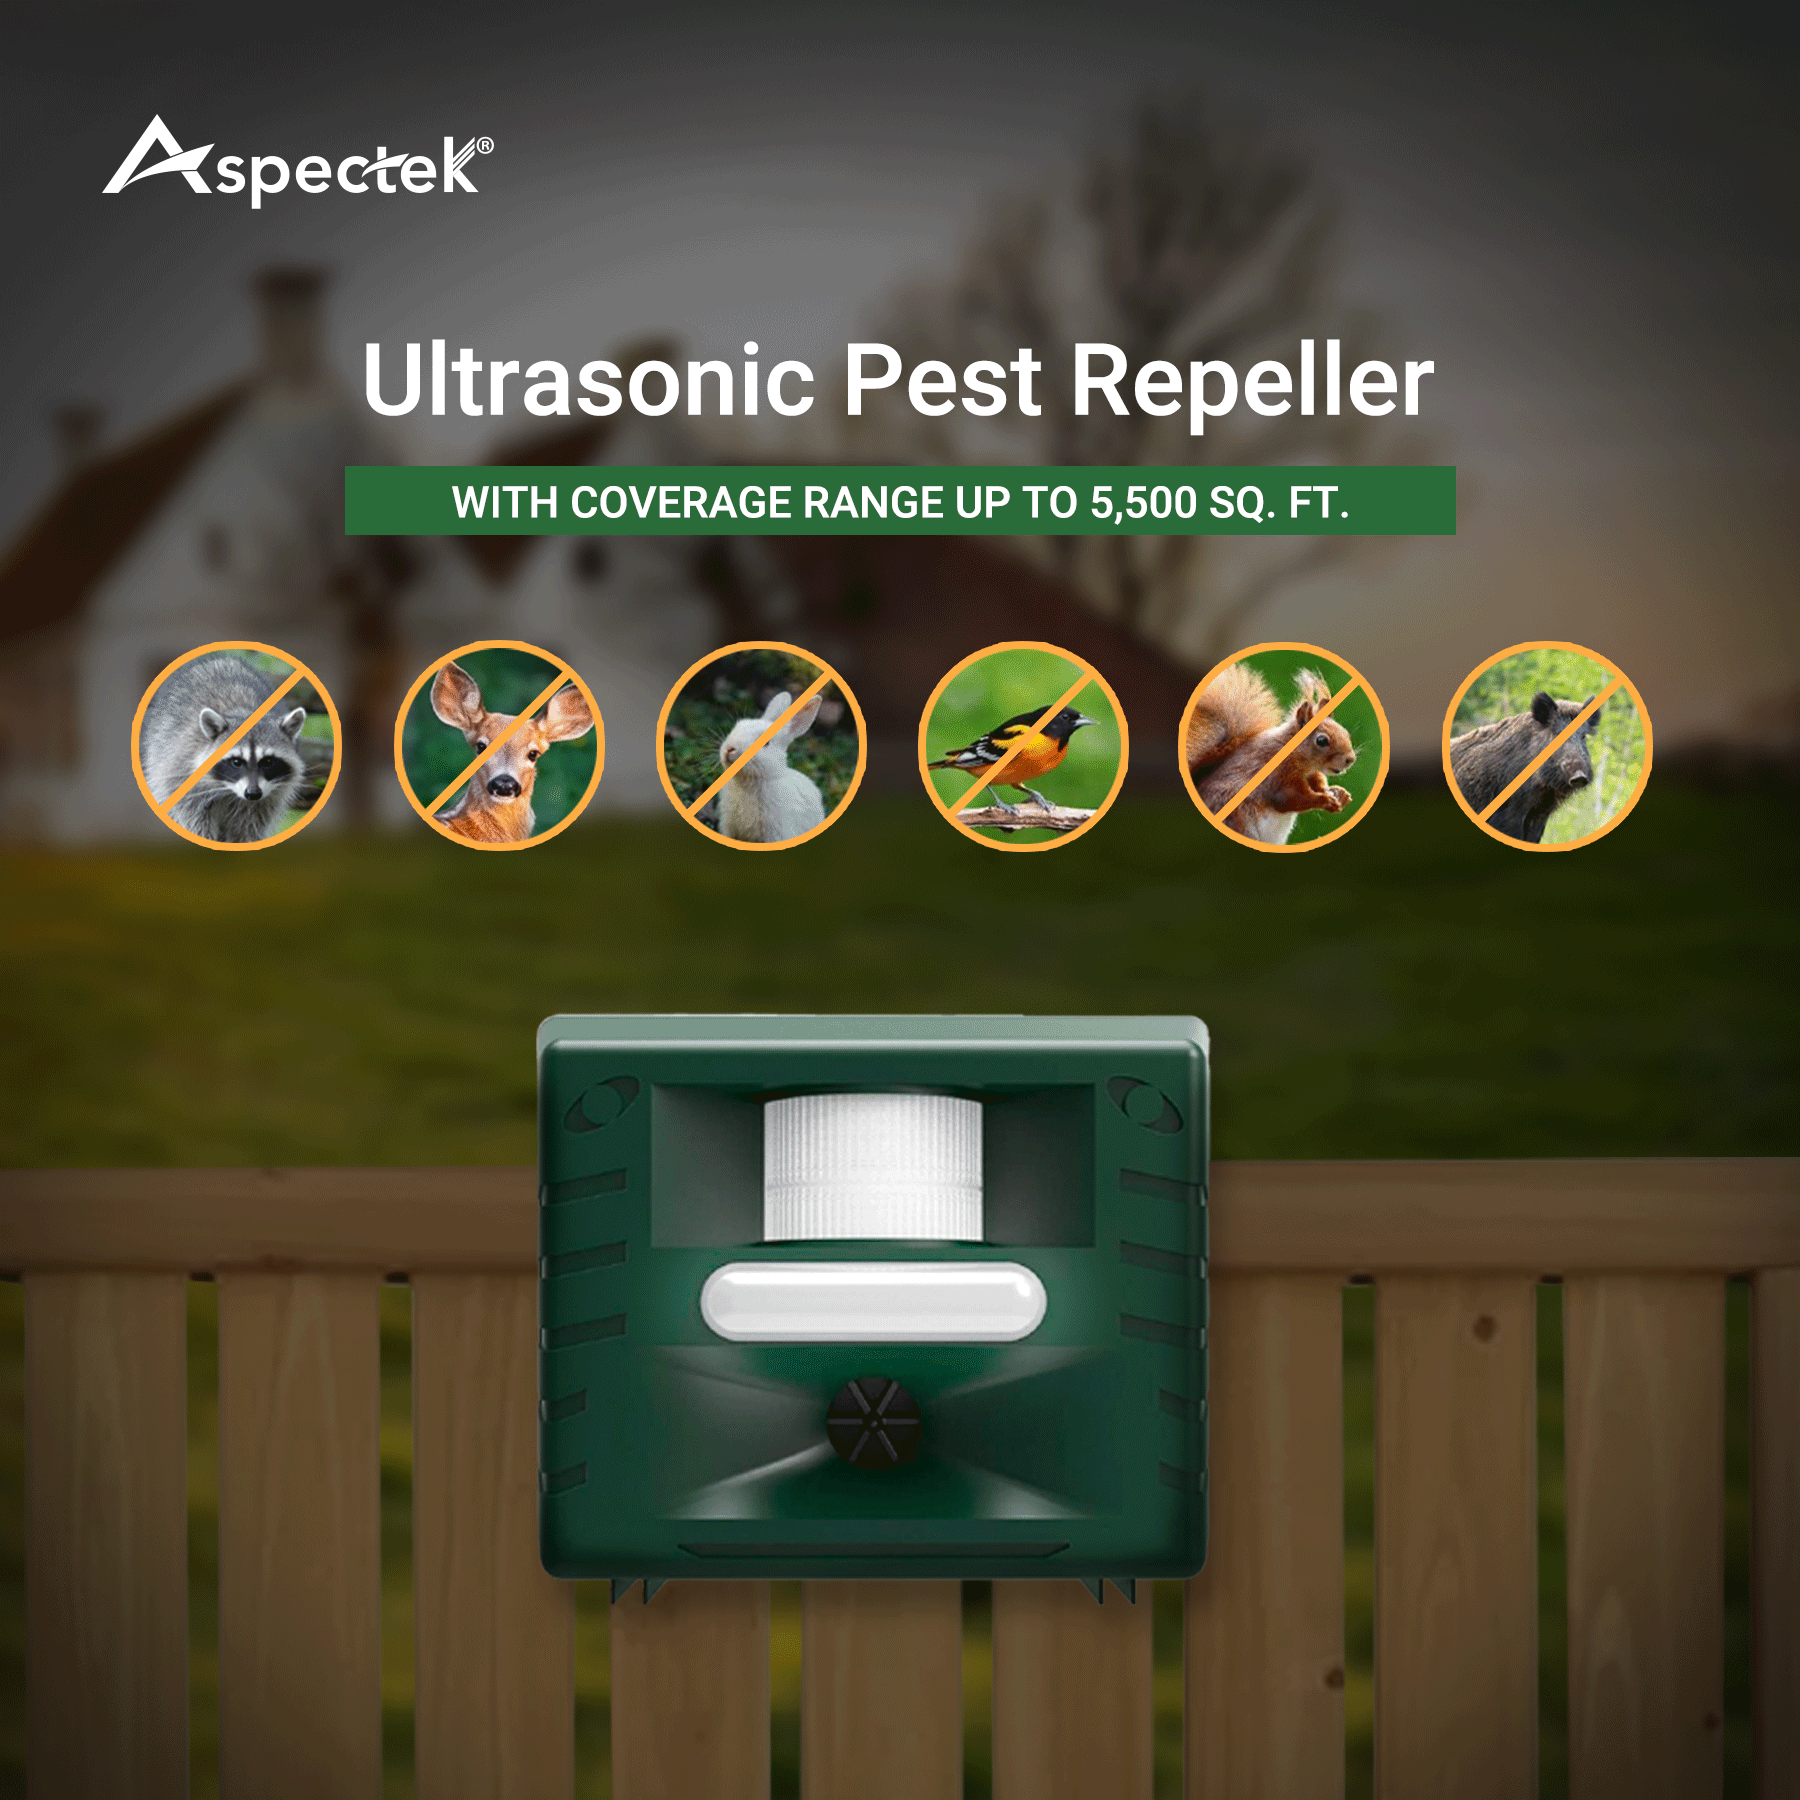 Are Ultrasonic Pest Repellers Effective Pest Control?